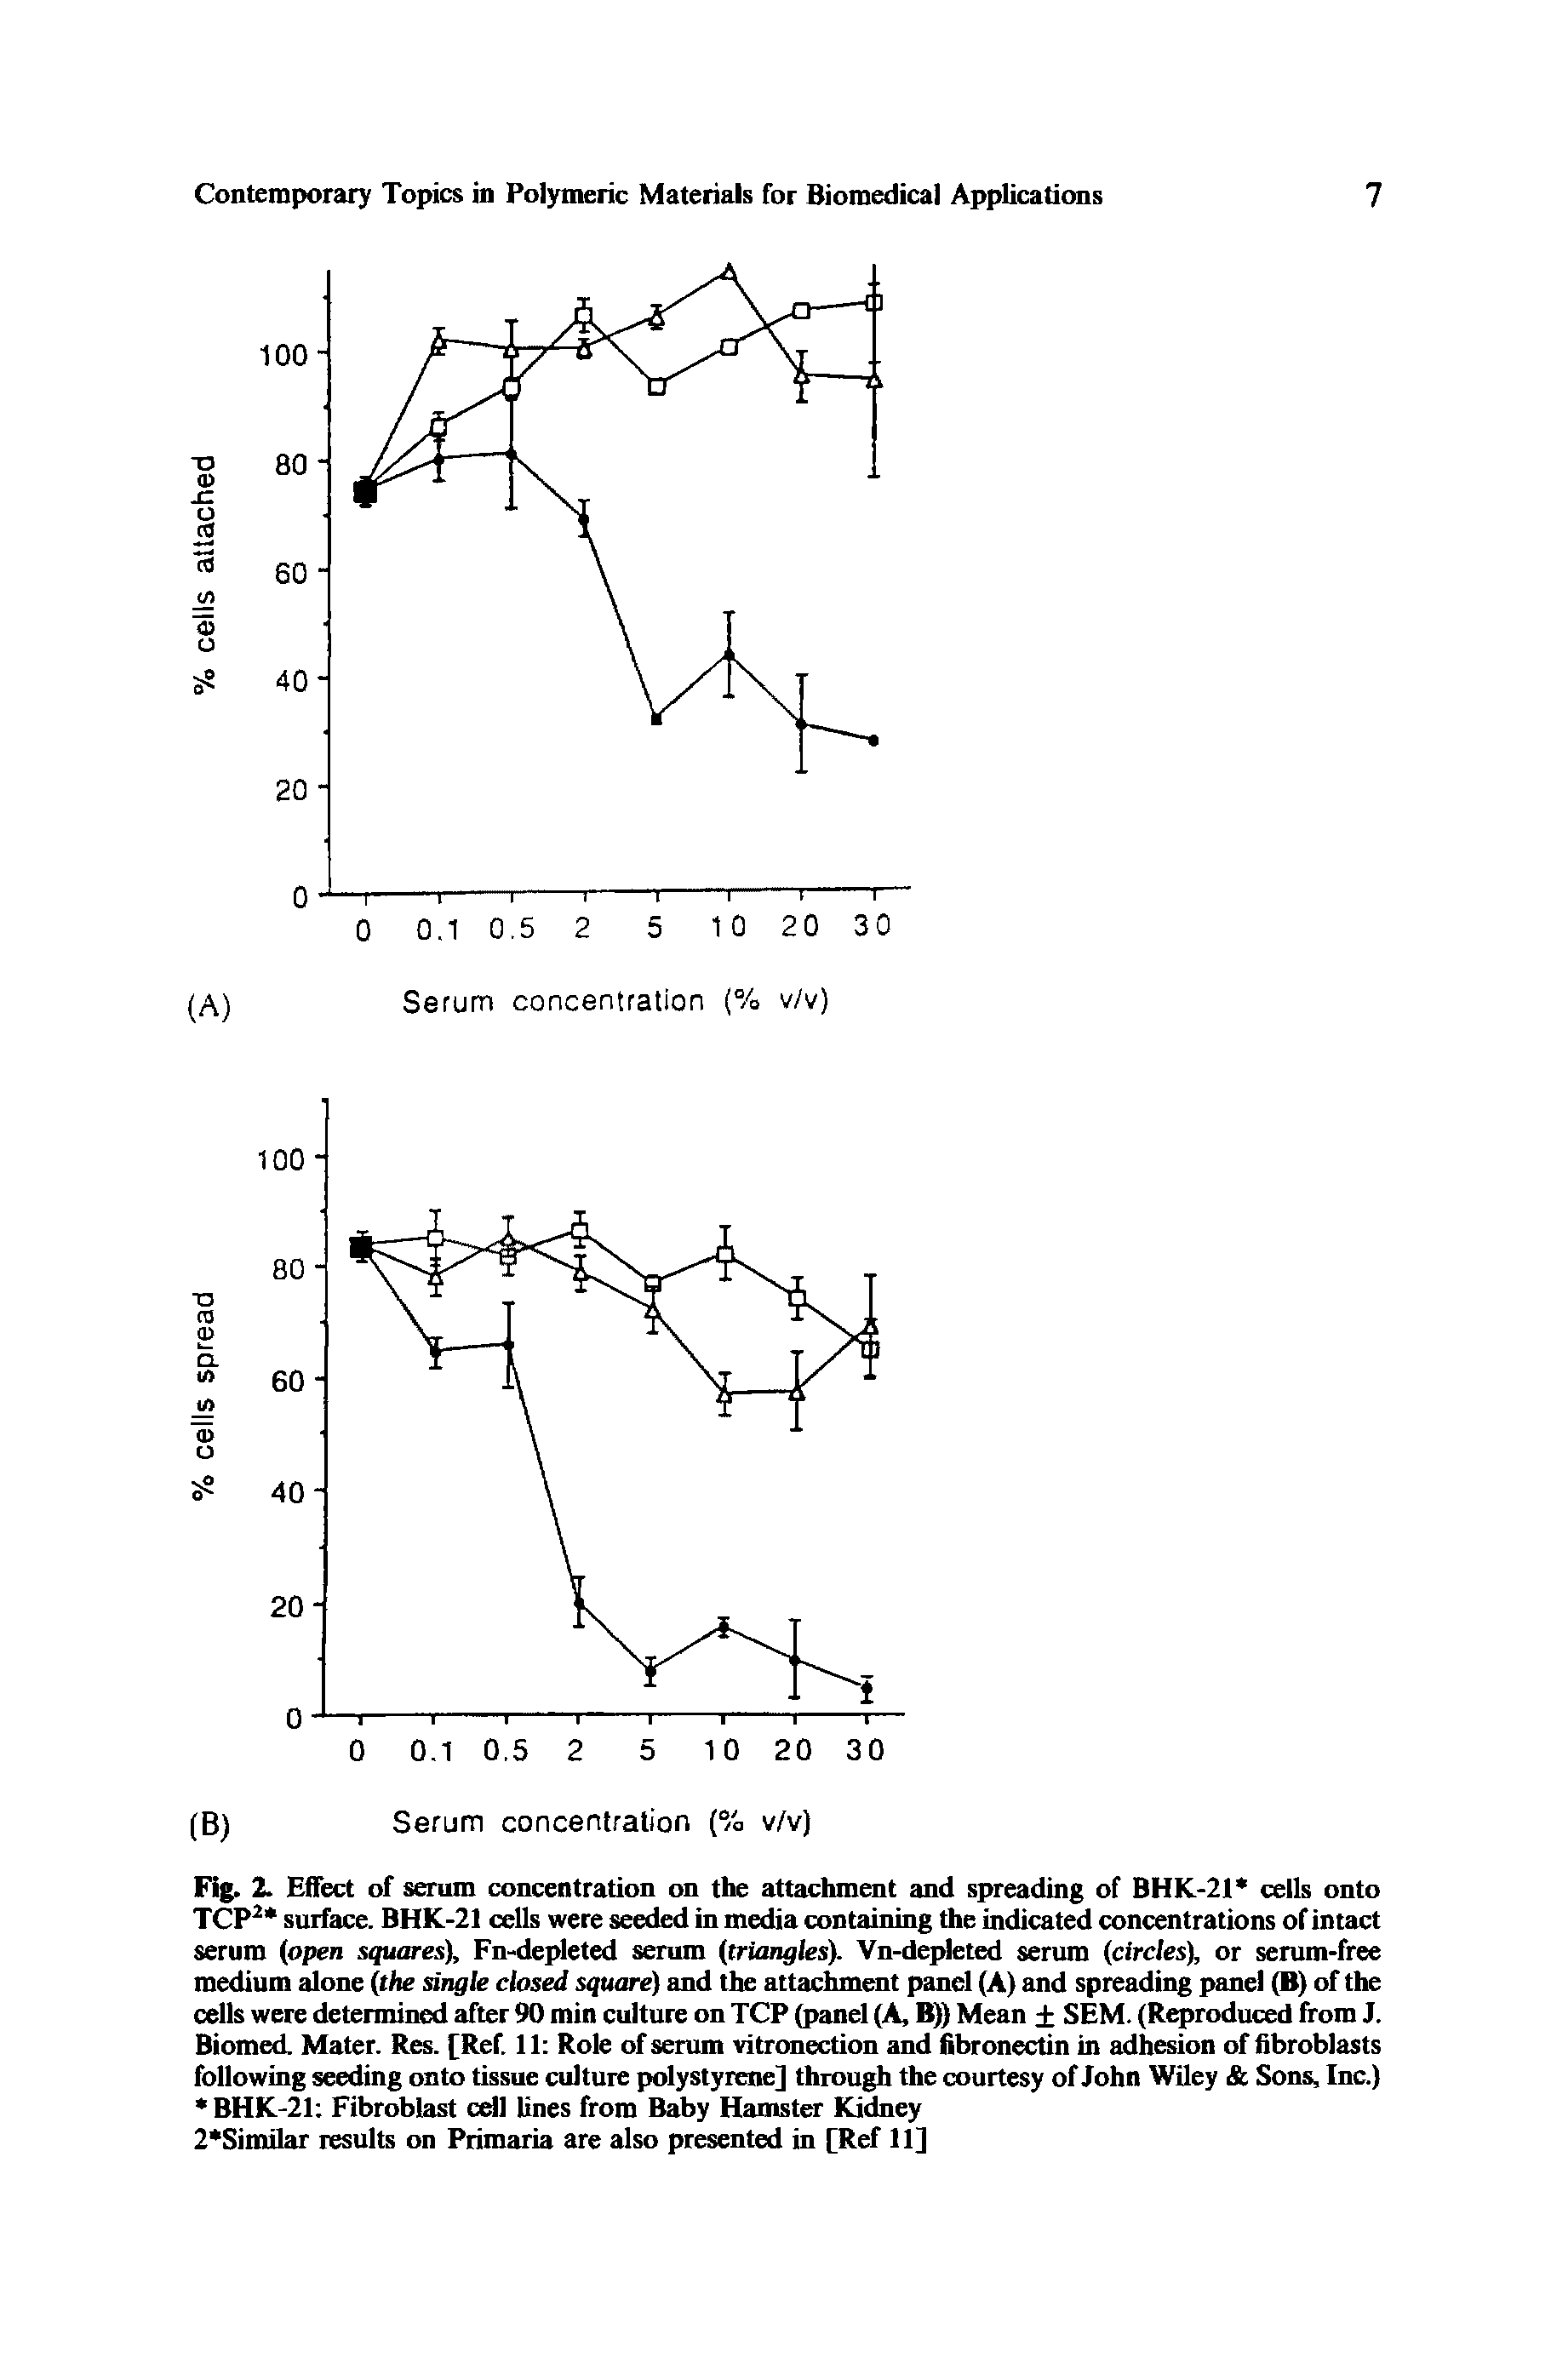 Fig. 2. Effect of serum concentration on the attachment and spreading of BHK-21 cells onto TCP2 surface. BHK-21 cells were seeded in media containing the indicated concentrations of intact serum (open squares), Fn-depleted serum (triangles). Vn-depleted serum (circles), or serum-free medium alone (the single closed square) and the attachment panel (A) and spreading panel (B) of the cells were determined after 90 min culture on TCP (panel (A, B)) Mean SEM. (Reproduced from J. Biomed. Mater. Res. [Ref. 11 Role of serum vitronection and fibronectin in adhesion of fibroblasts following seeding onto tissue culture polystyrene] through the courtesy of John Wiley Sons, Inc.) BHK-21 Fibroblast cell lines from Baby Hamster Kidney 2 Similar results on Primaria are also presented in [Ref 11]...